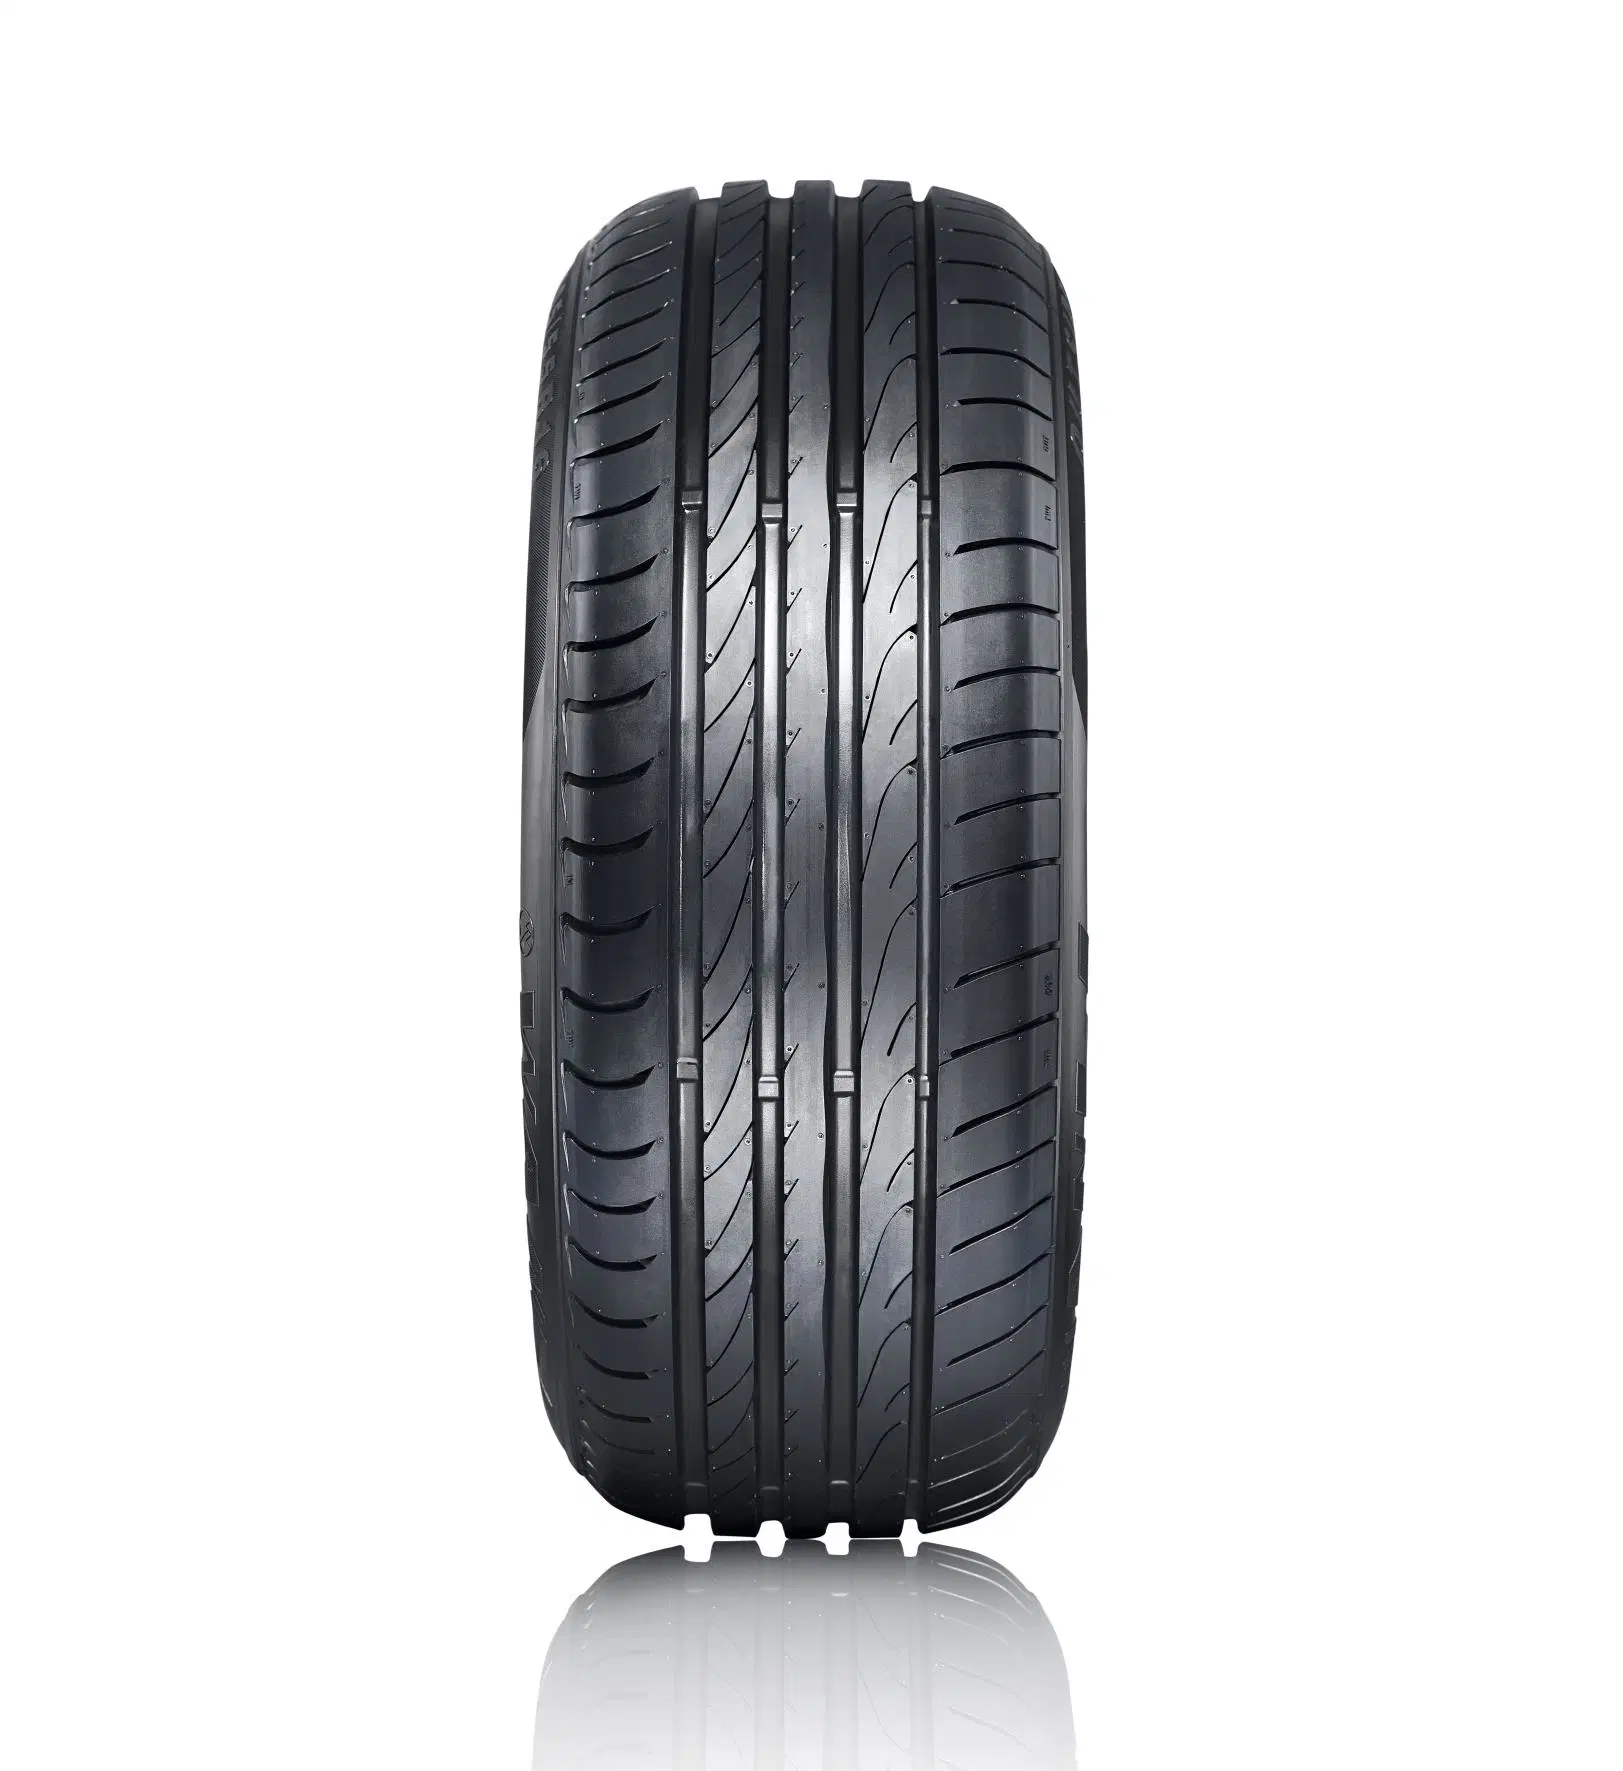 Looking for Agents to Distribute Our Products Radial PCR Tyre/Tire 185/65r14, 195/65r15, 205/65r15, 205/55r16